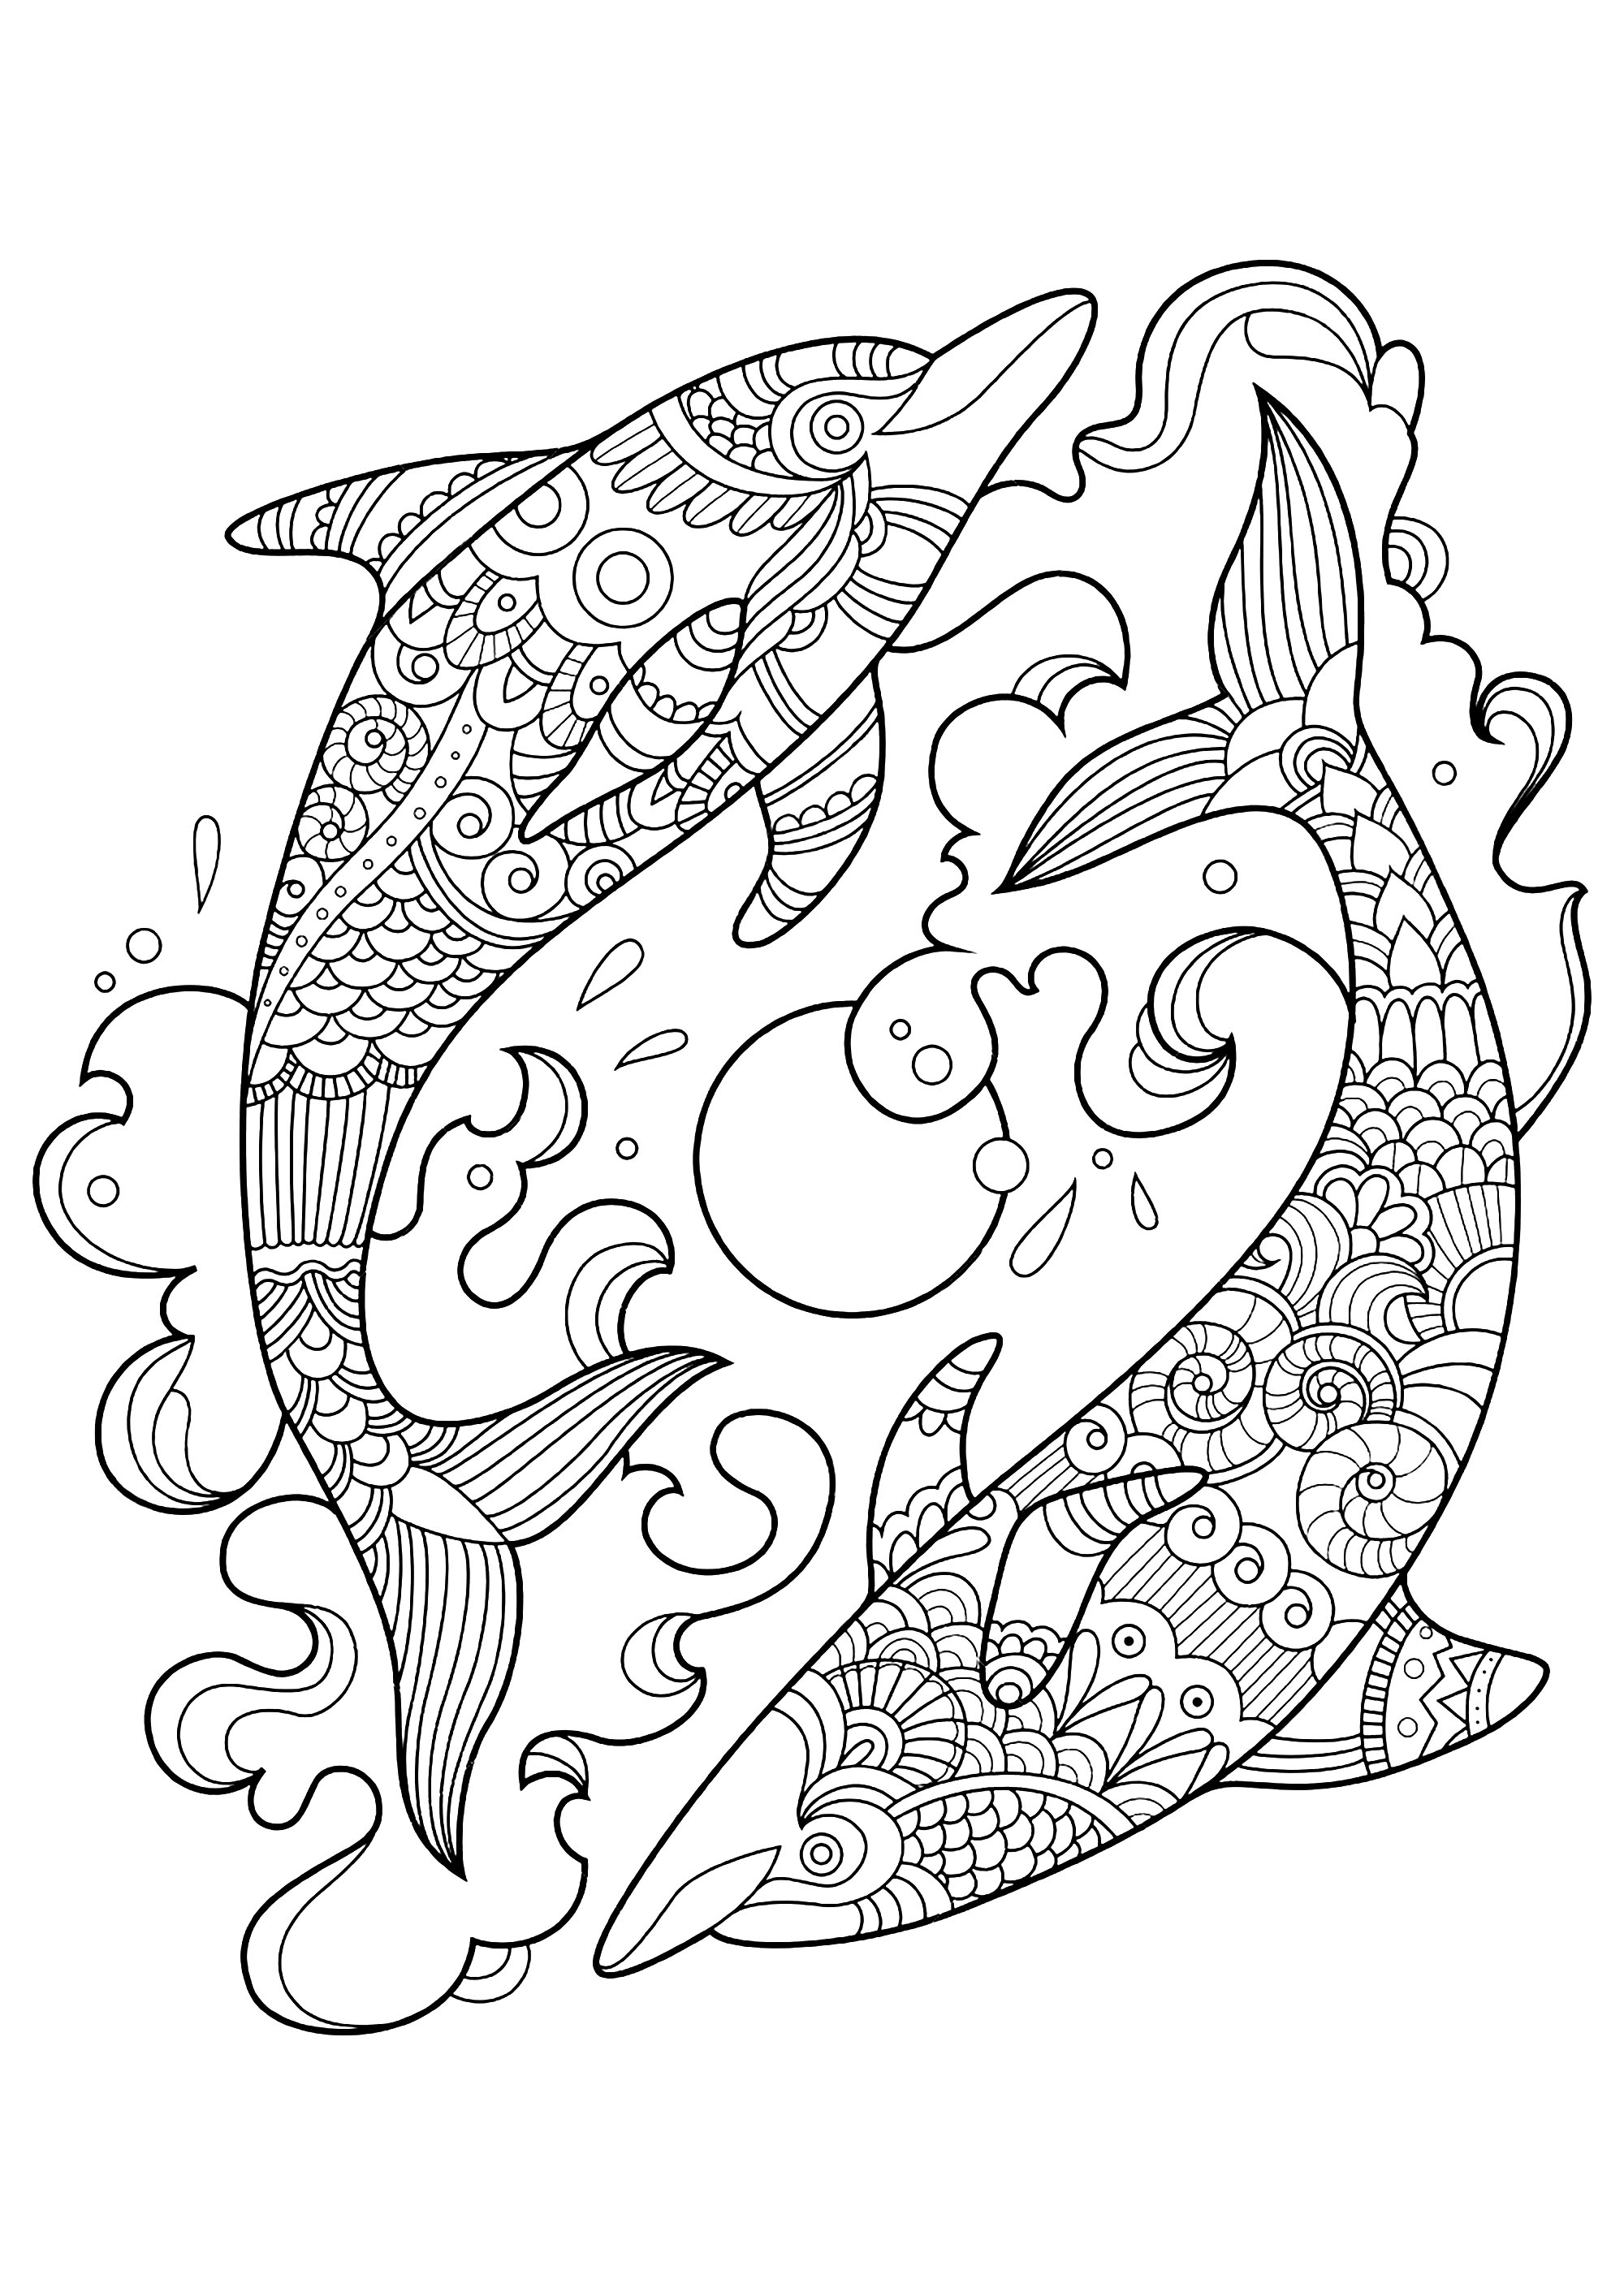 Two dolphins in the ocean - Dolphins Adult Coloring Pages